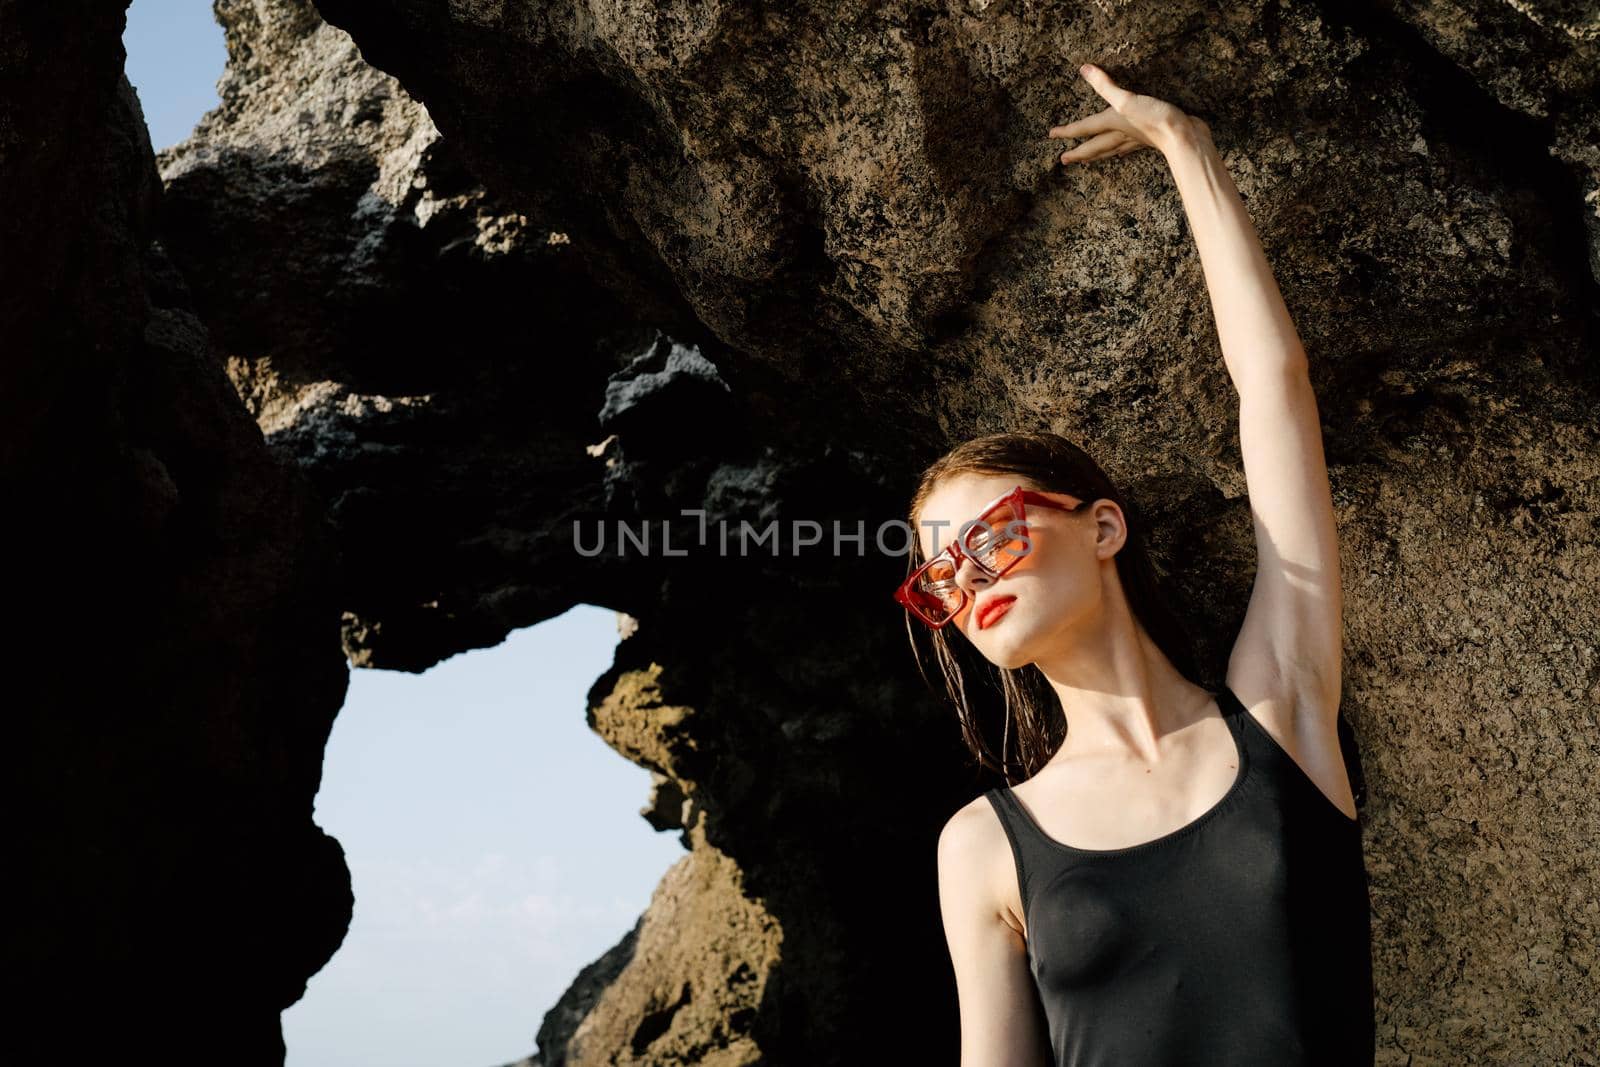 woman in black swimsuit sunglasses summer rocks exotic. High quality photo